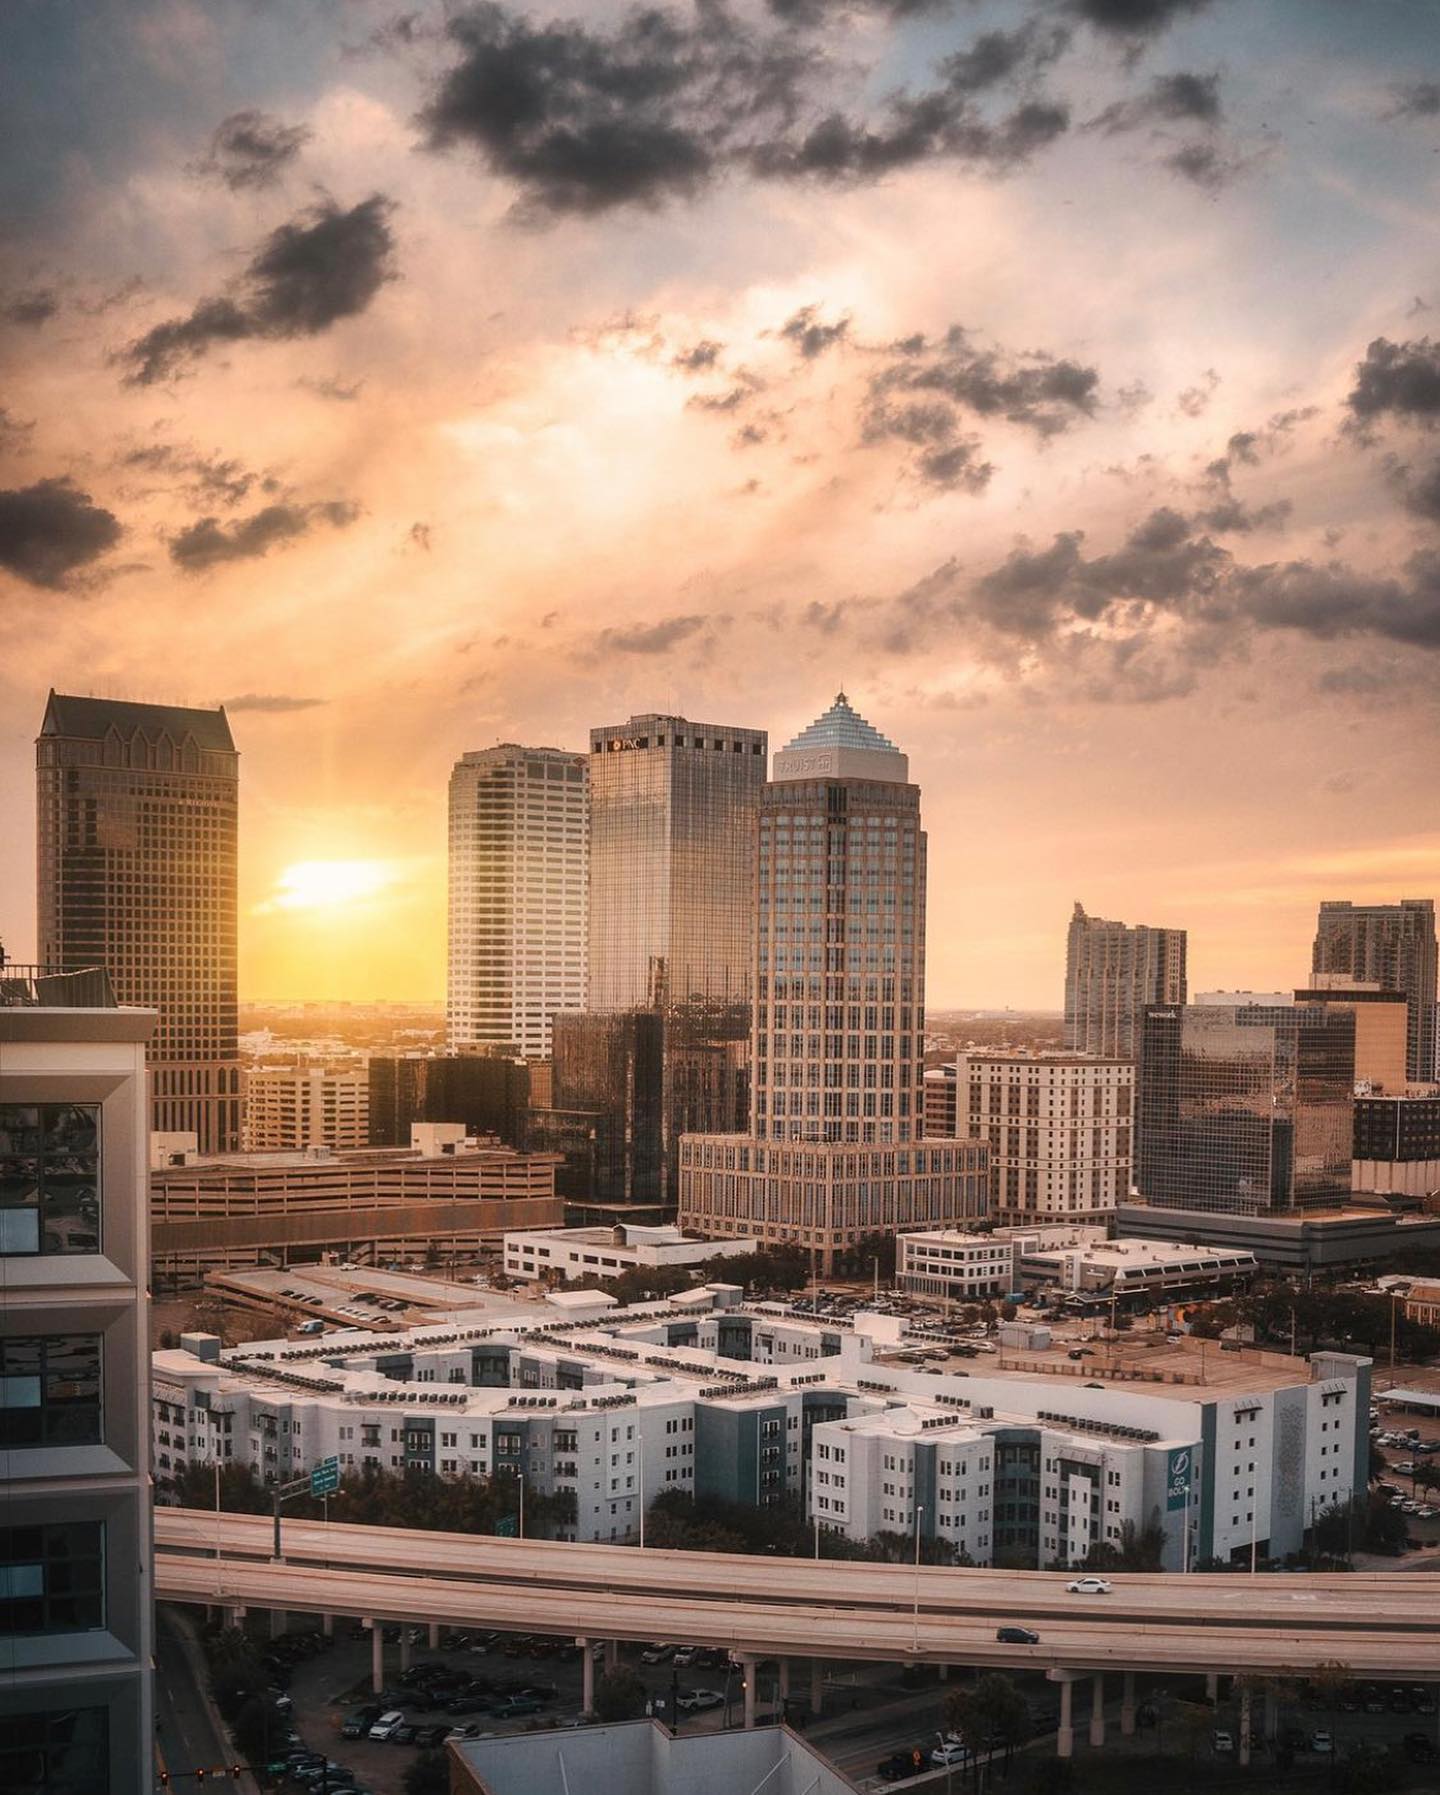 Sunset over downtown Tampa